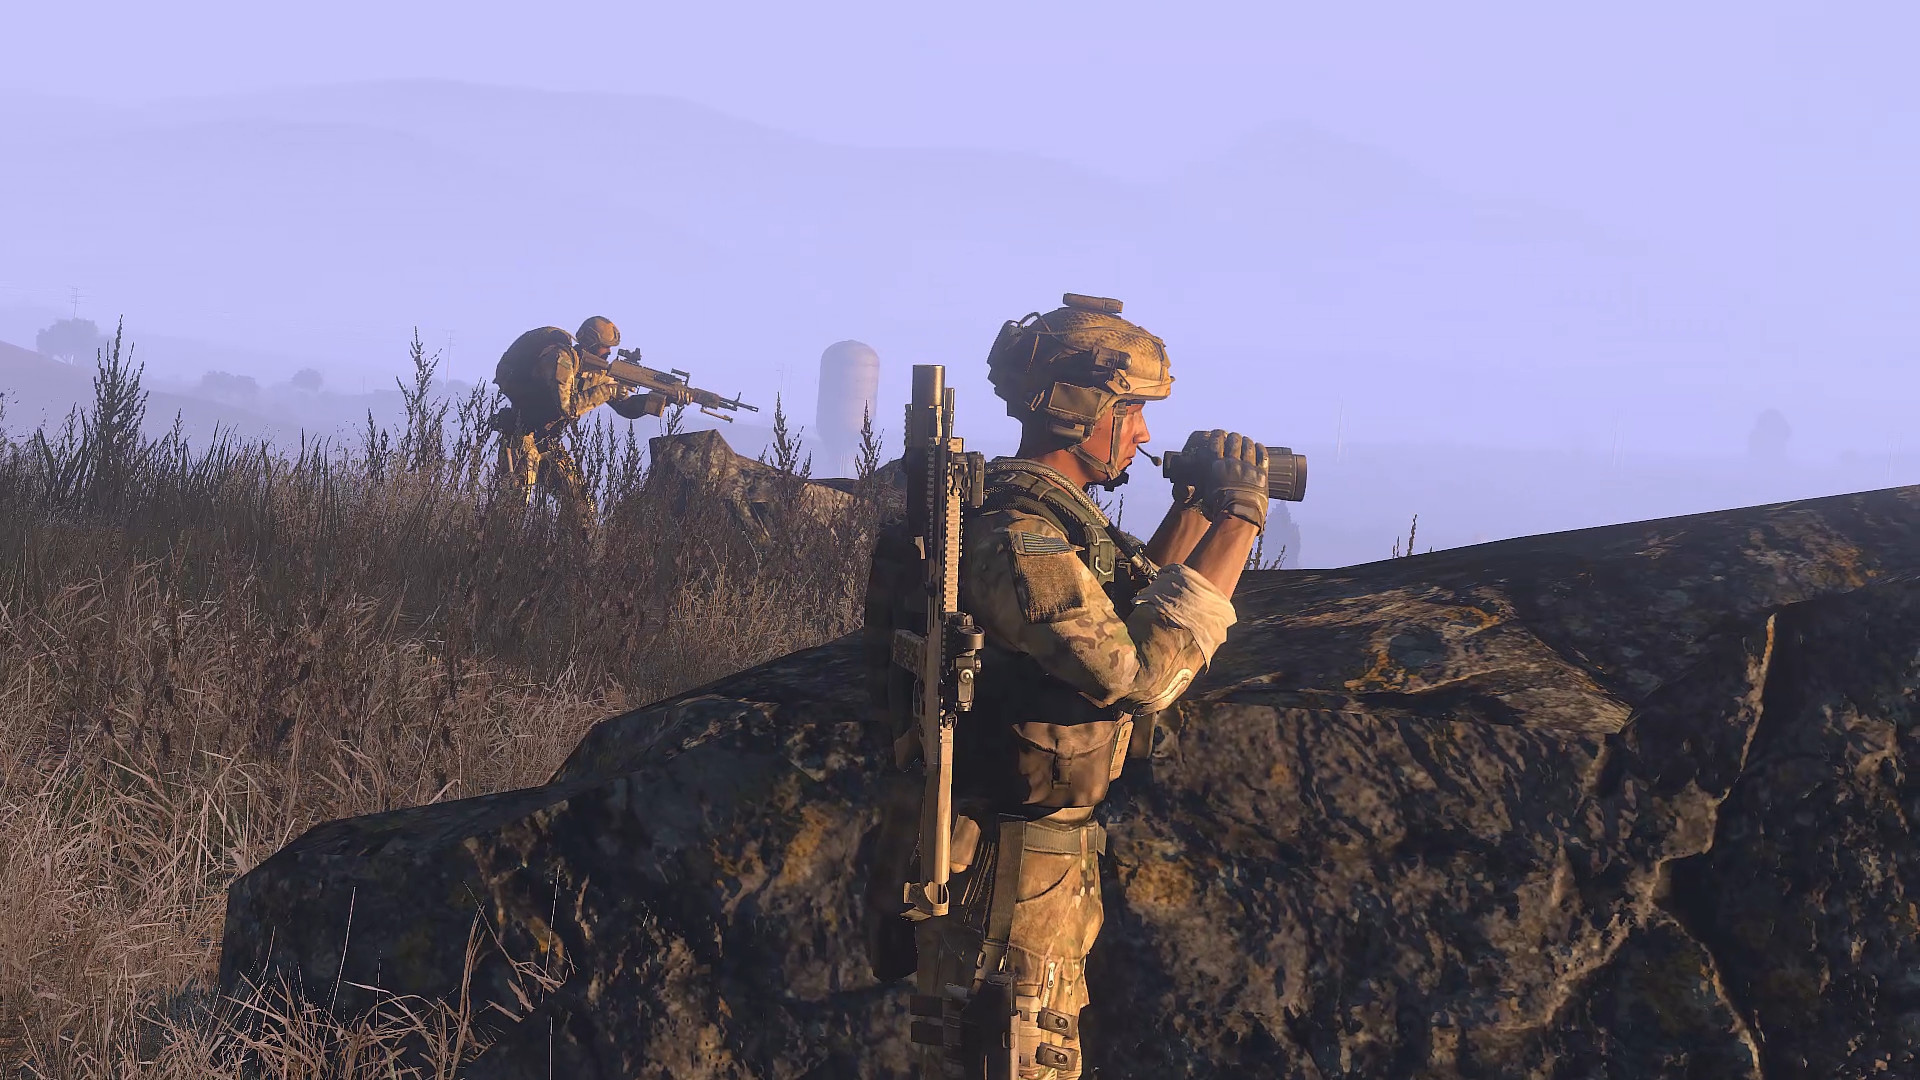 Steam Community :: Guide :: ARMA 3 Sniper/Spotter Guide by Reckoning Gaming